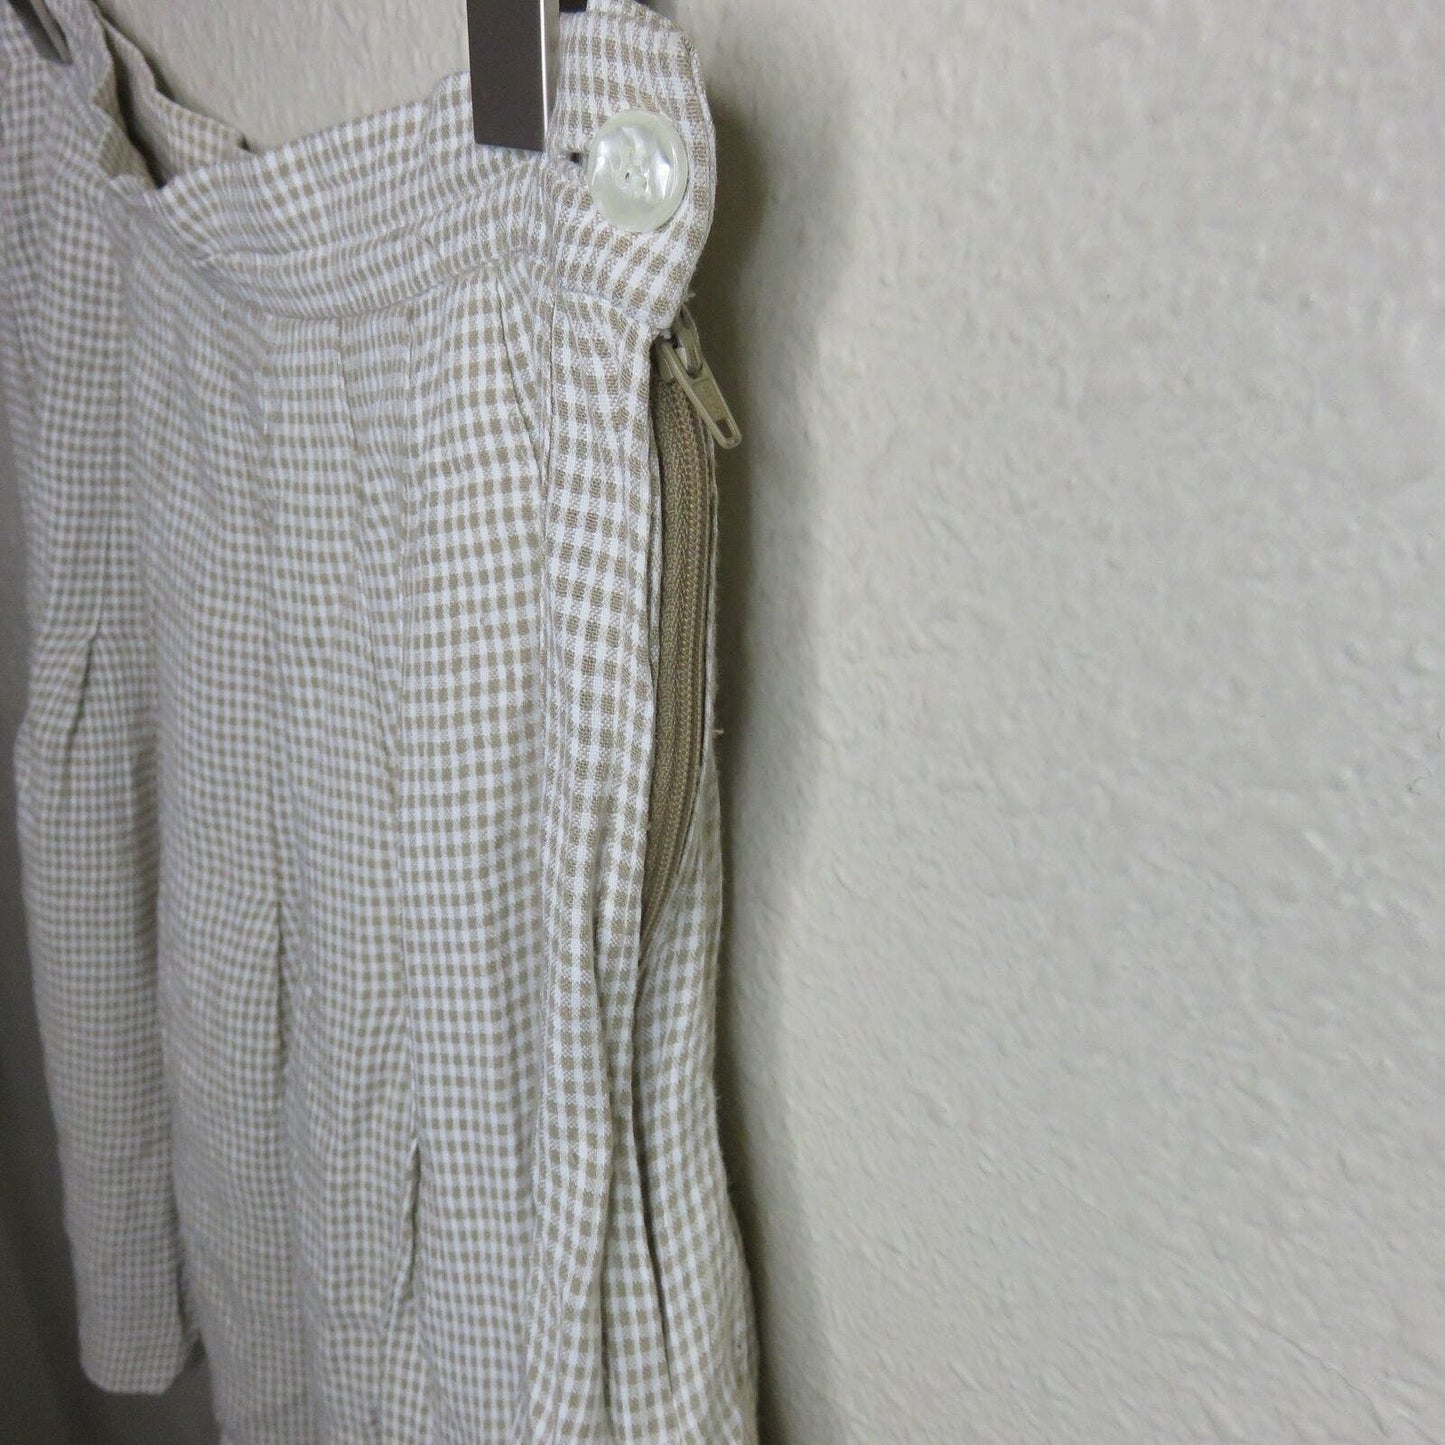 Y2K Khaki Gingham Pleated Flowy Short Skirt Made in USA - Women's Size 6